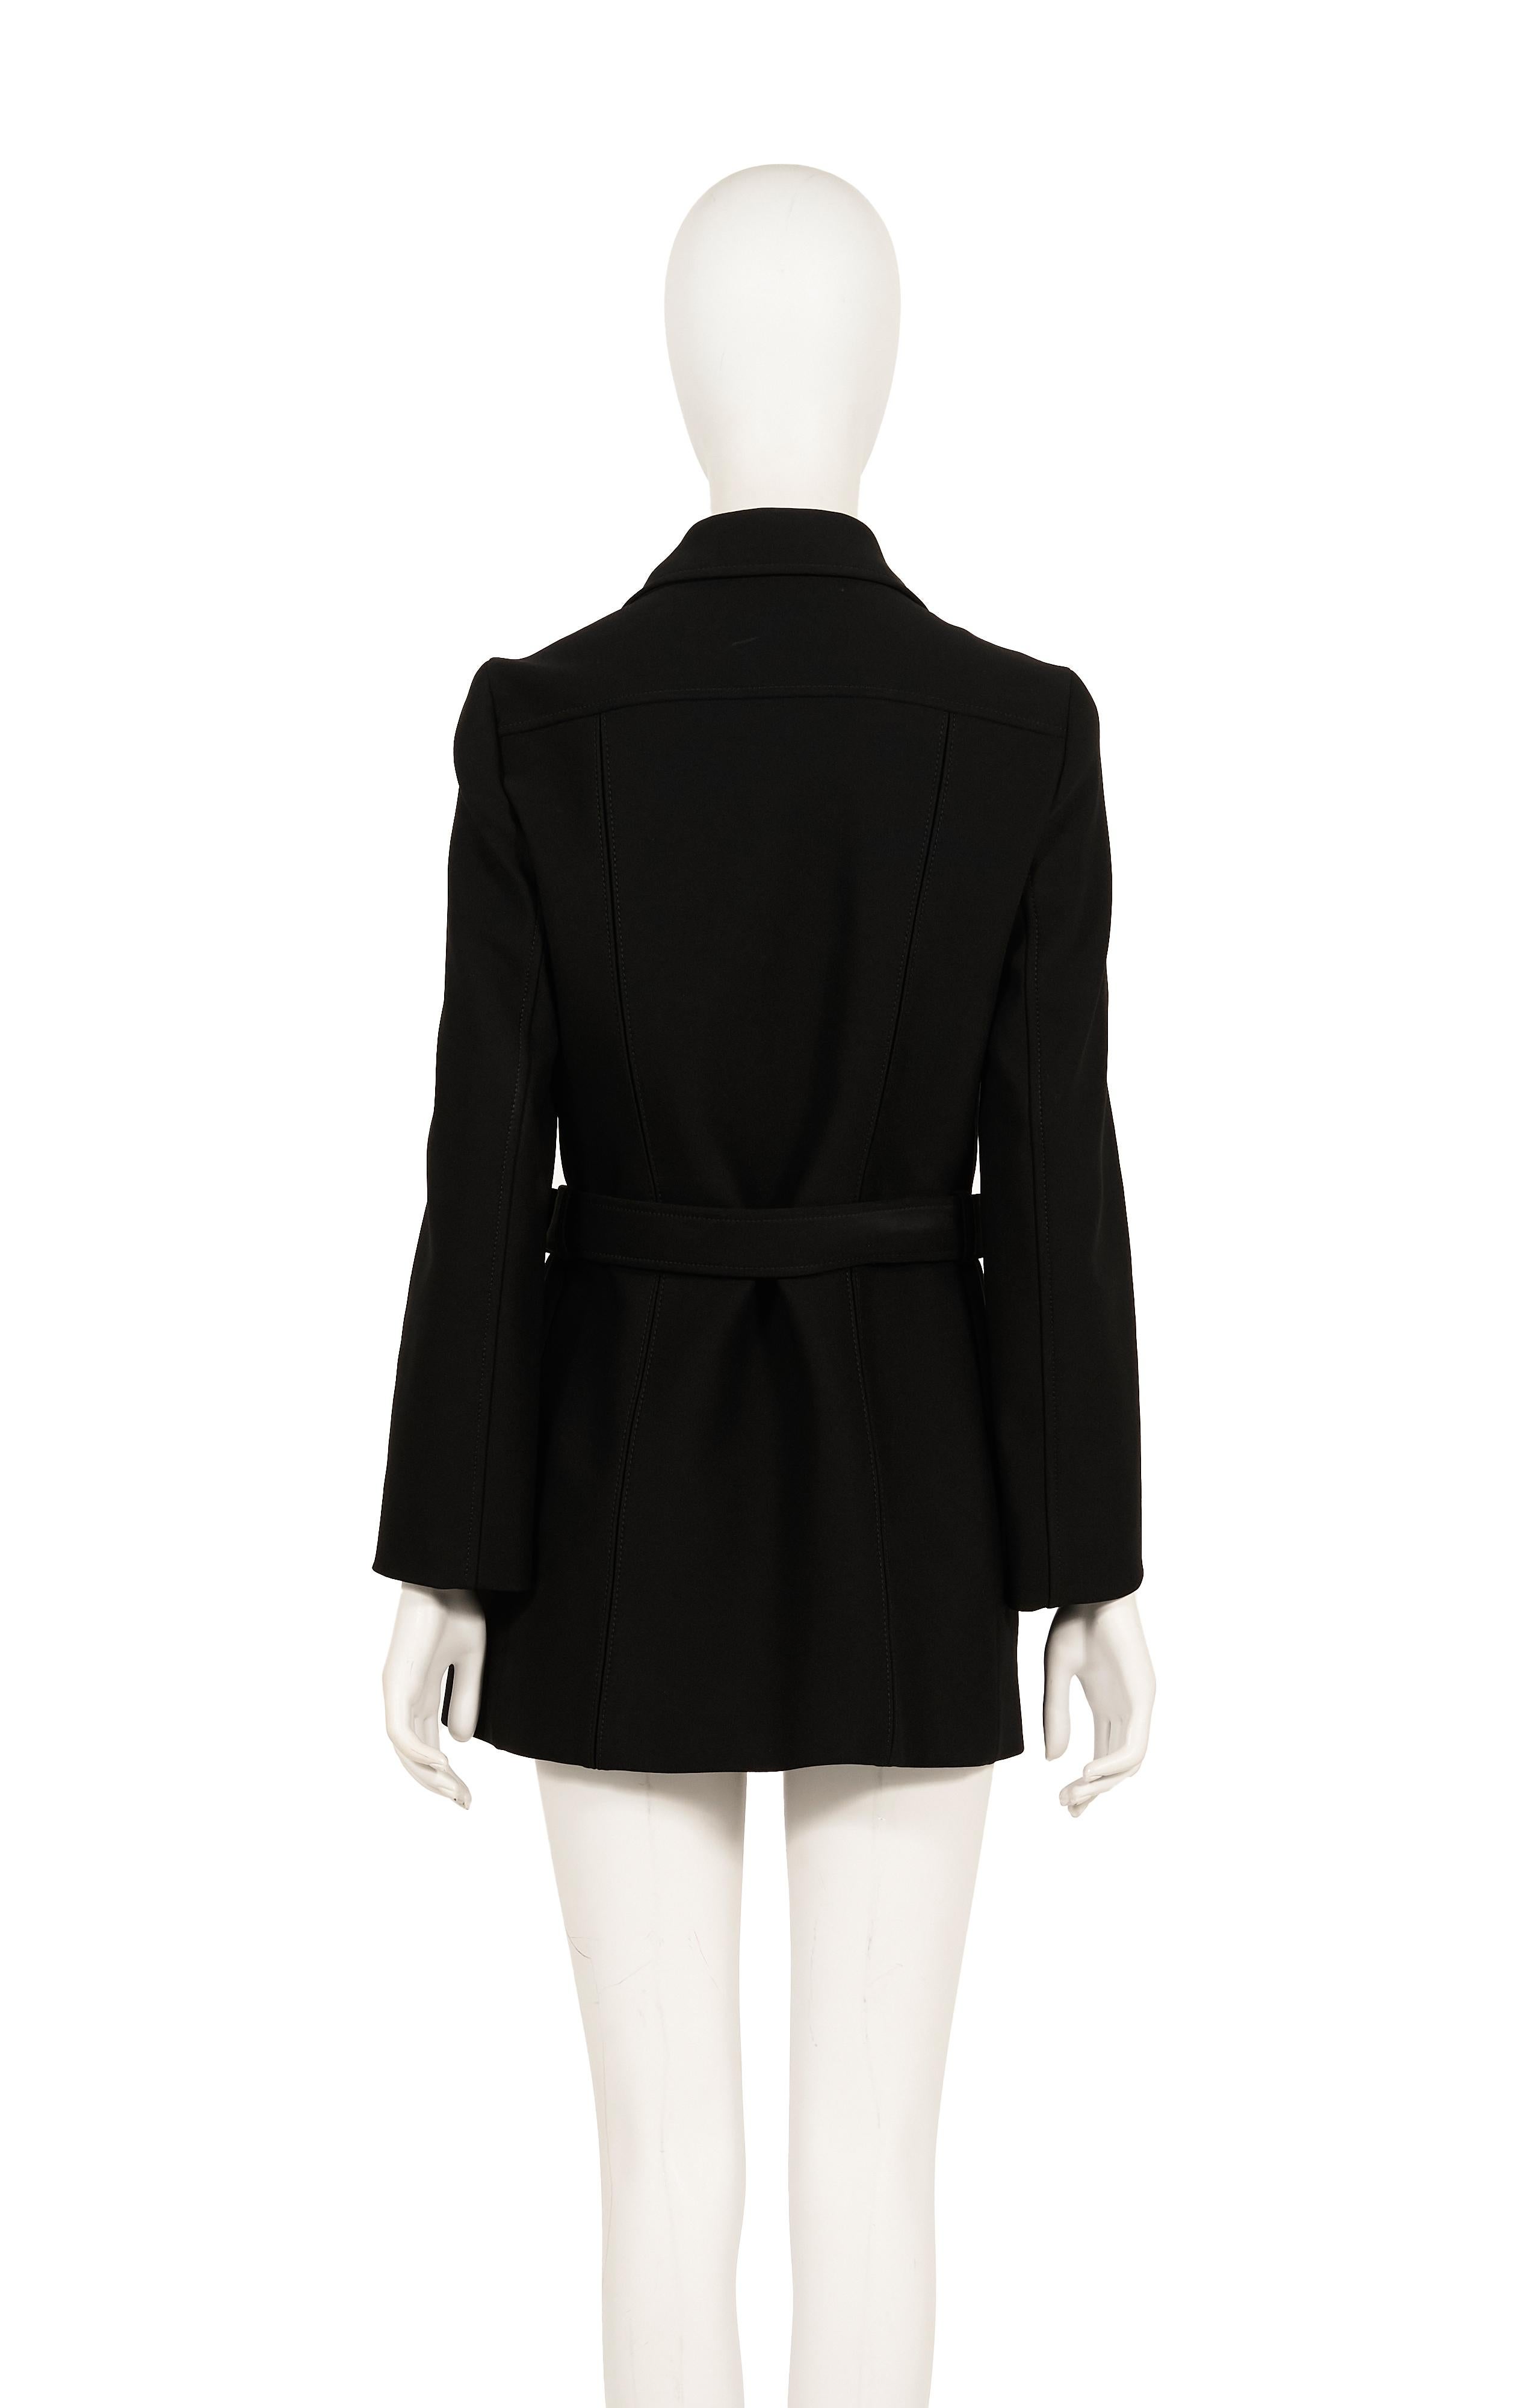 Prada F/W 1995 black tunic jacket in nylon In Excellent Condition For Sale In Rome, IT